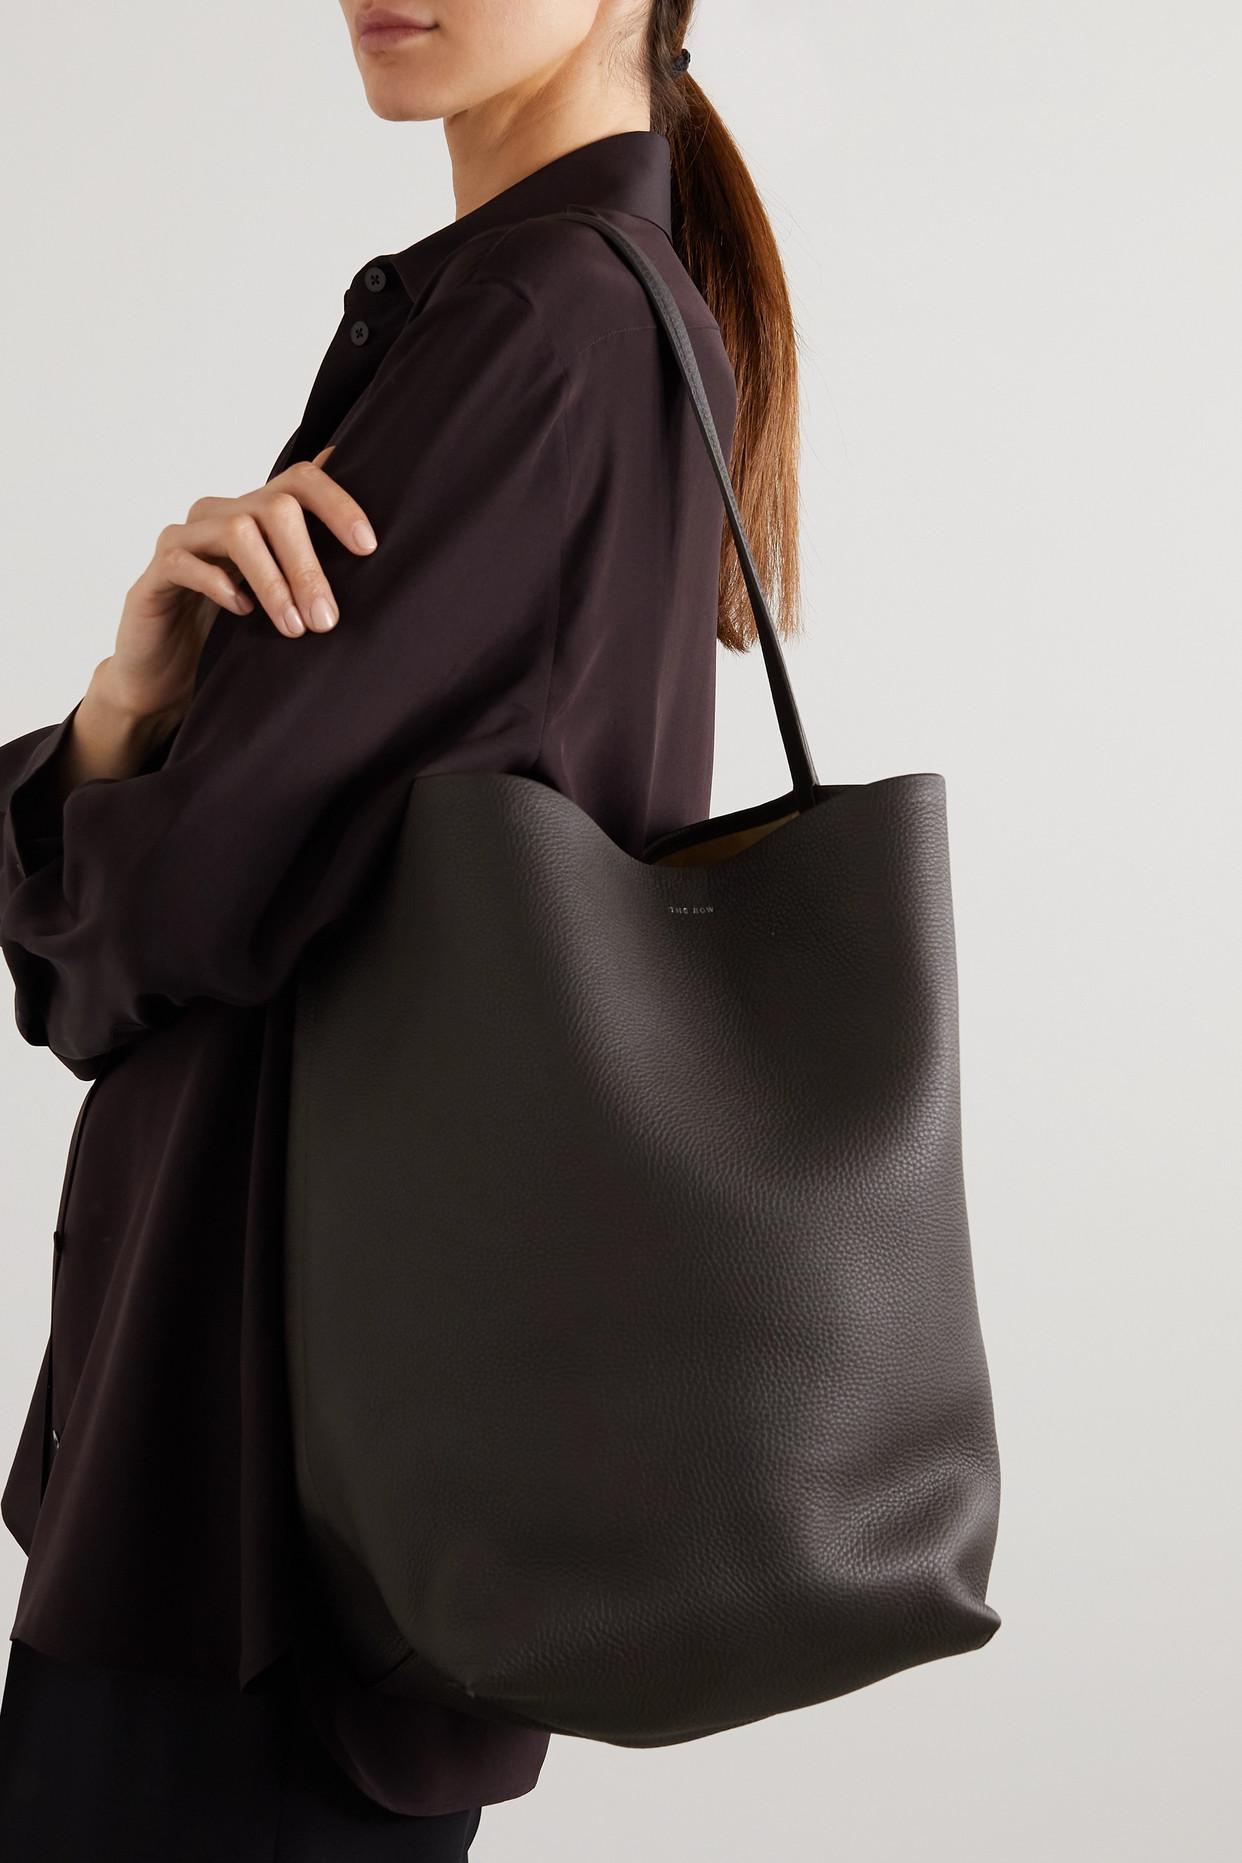 The Row N/s Park Textured-leather Tote in Brown Lyst Canada